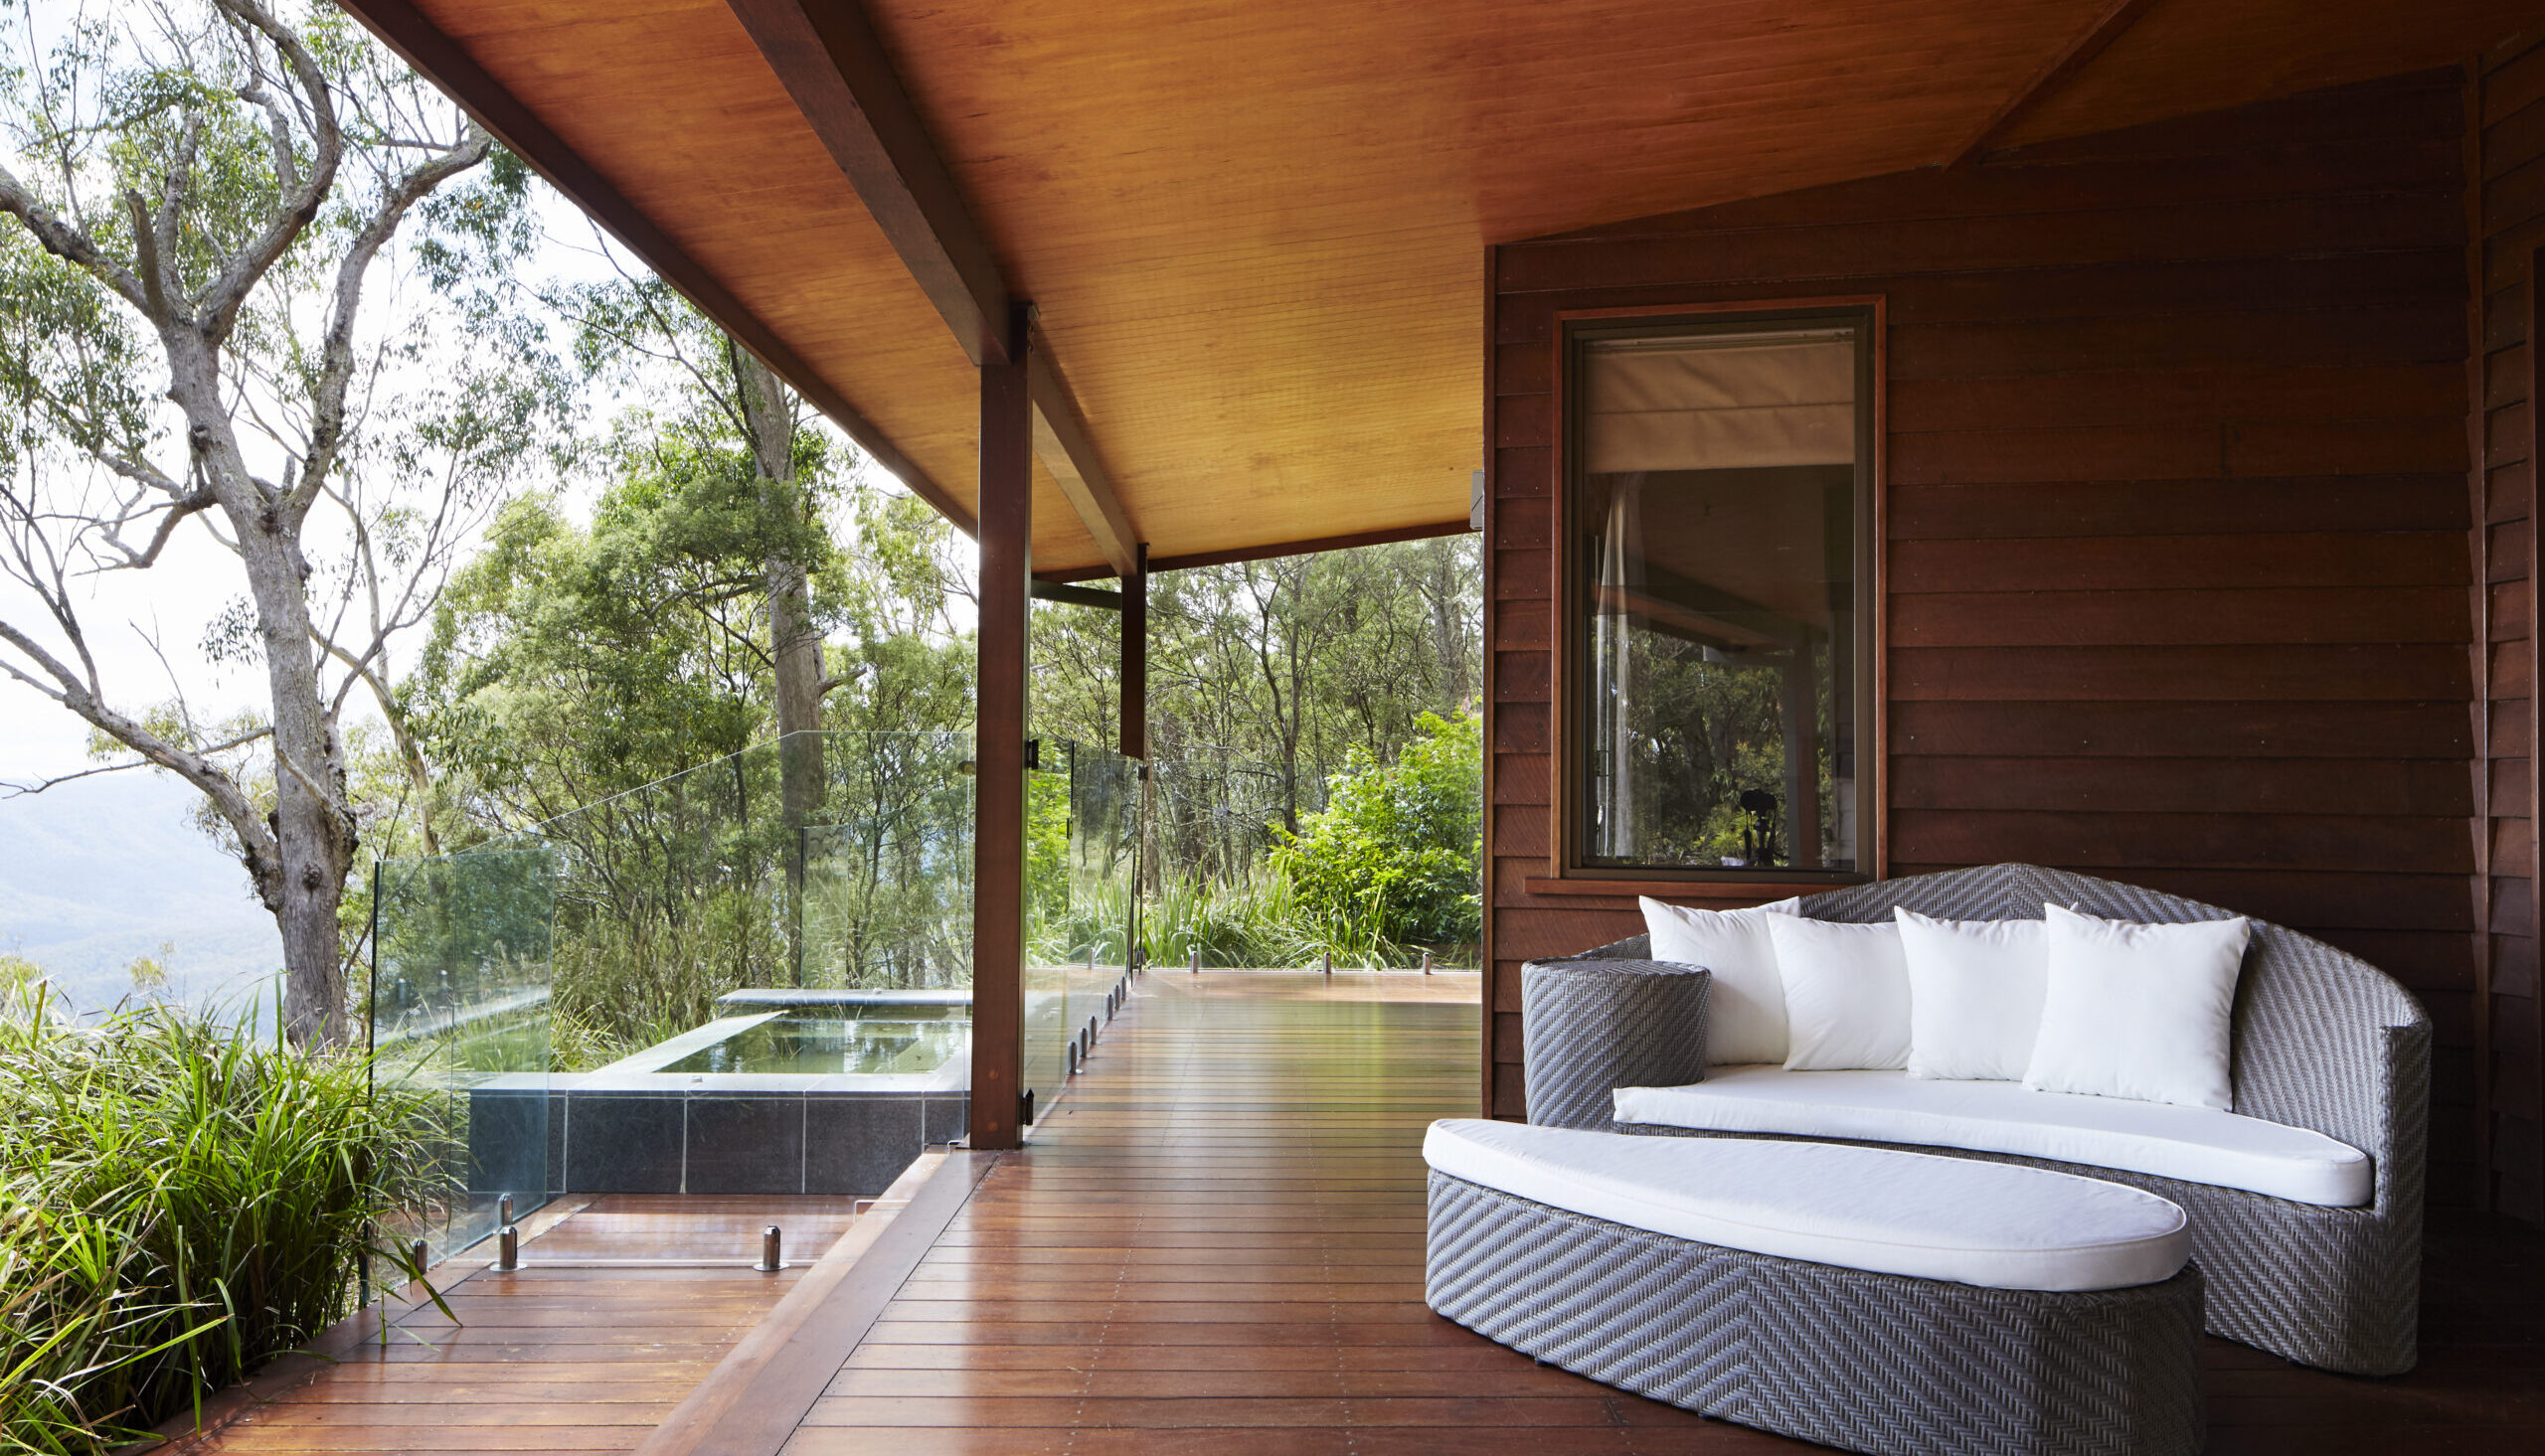 Day bed and plunge pool on deck at Spicers Peak Lodge